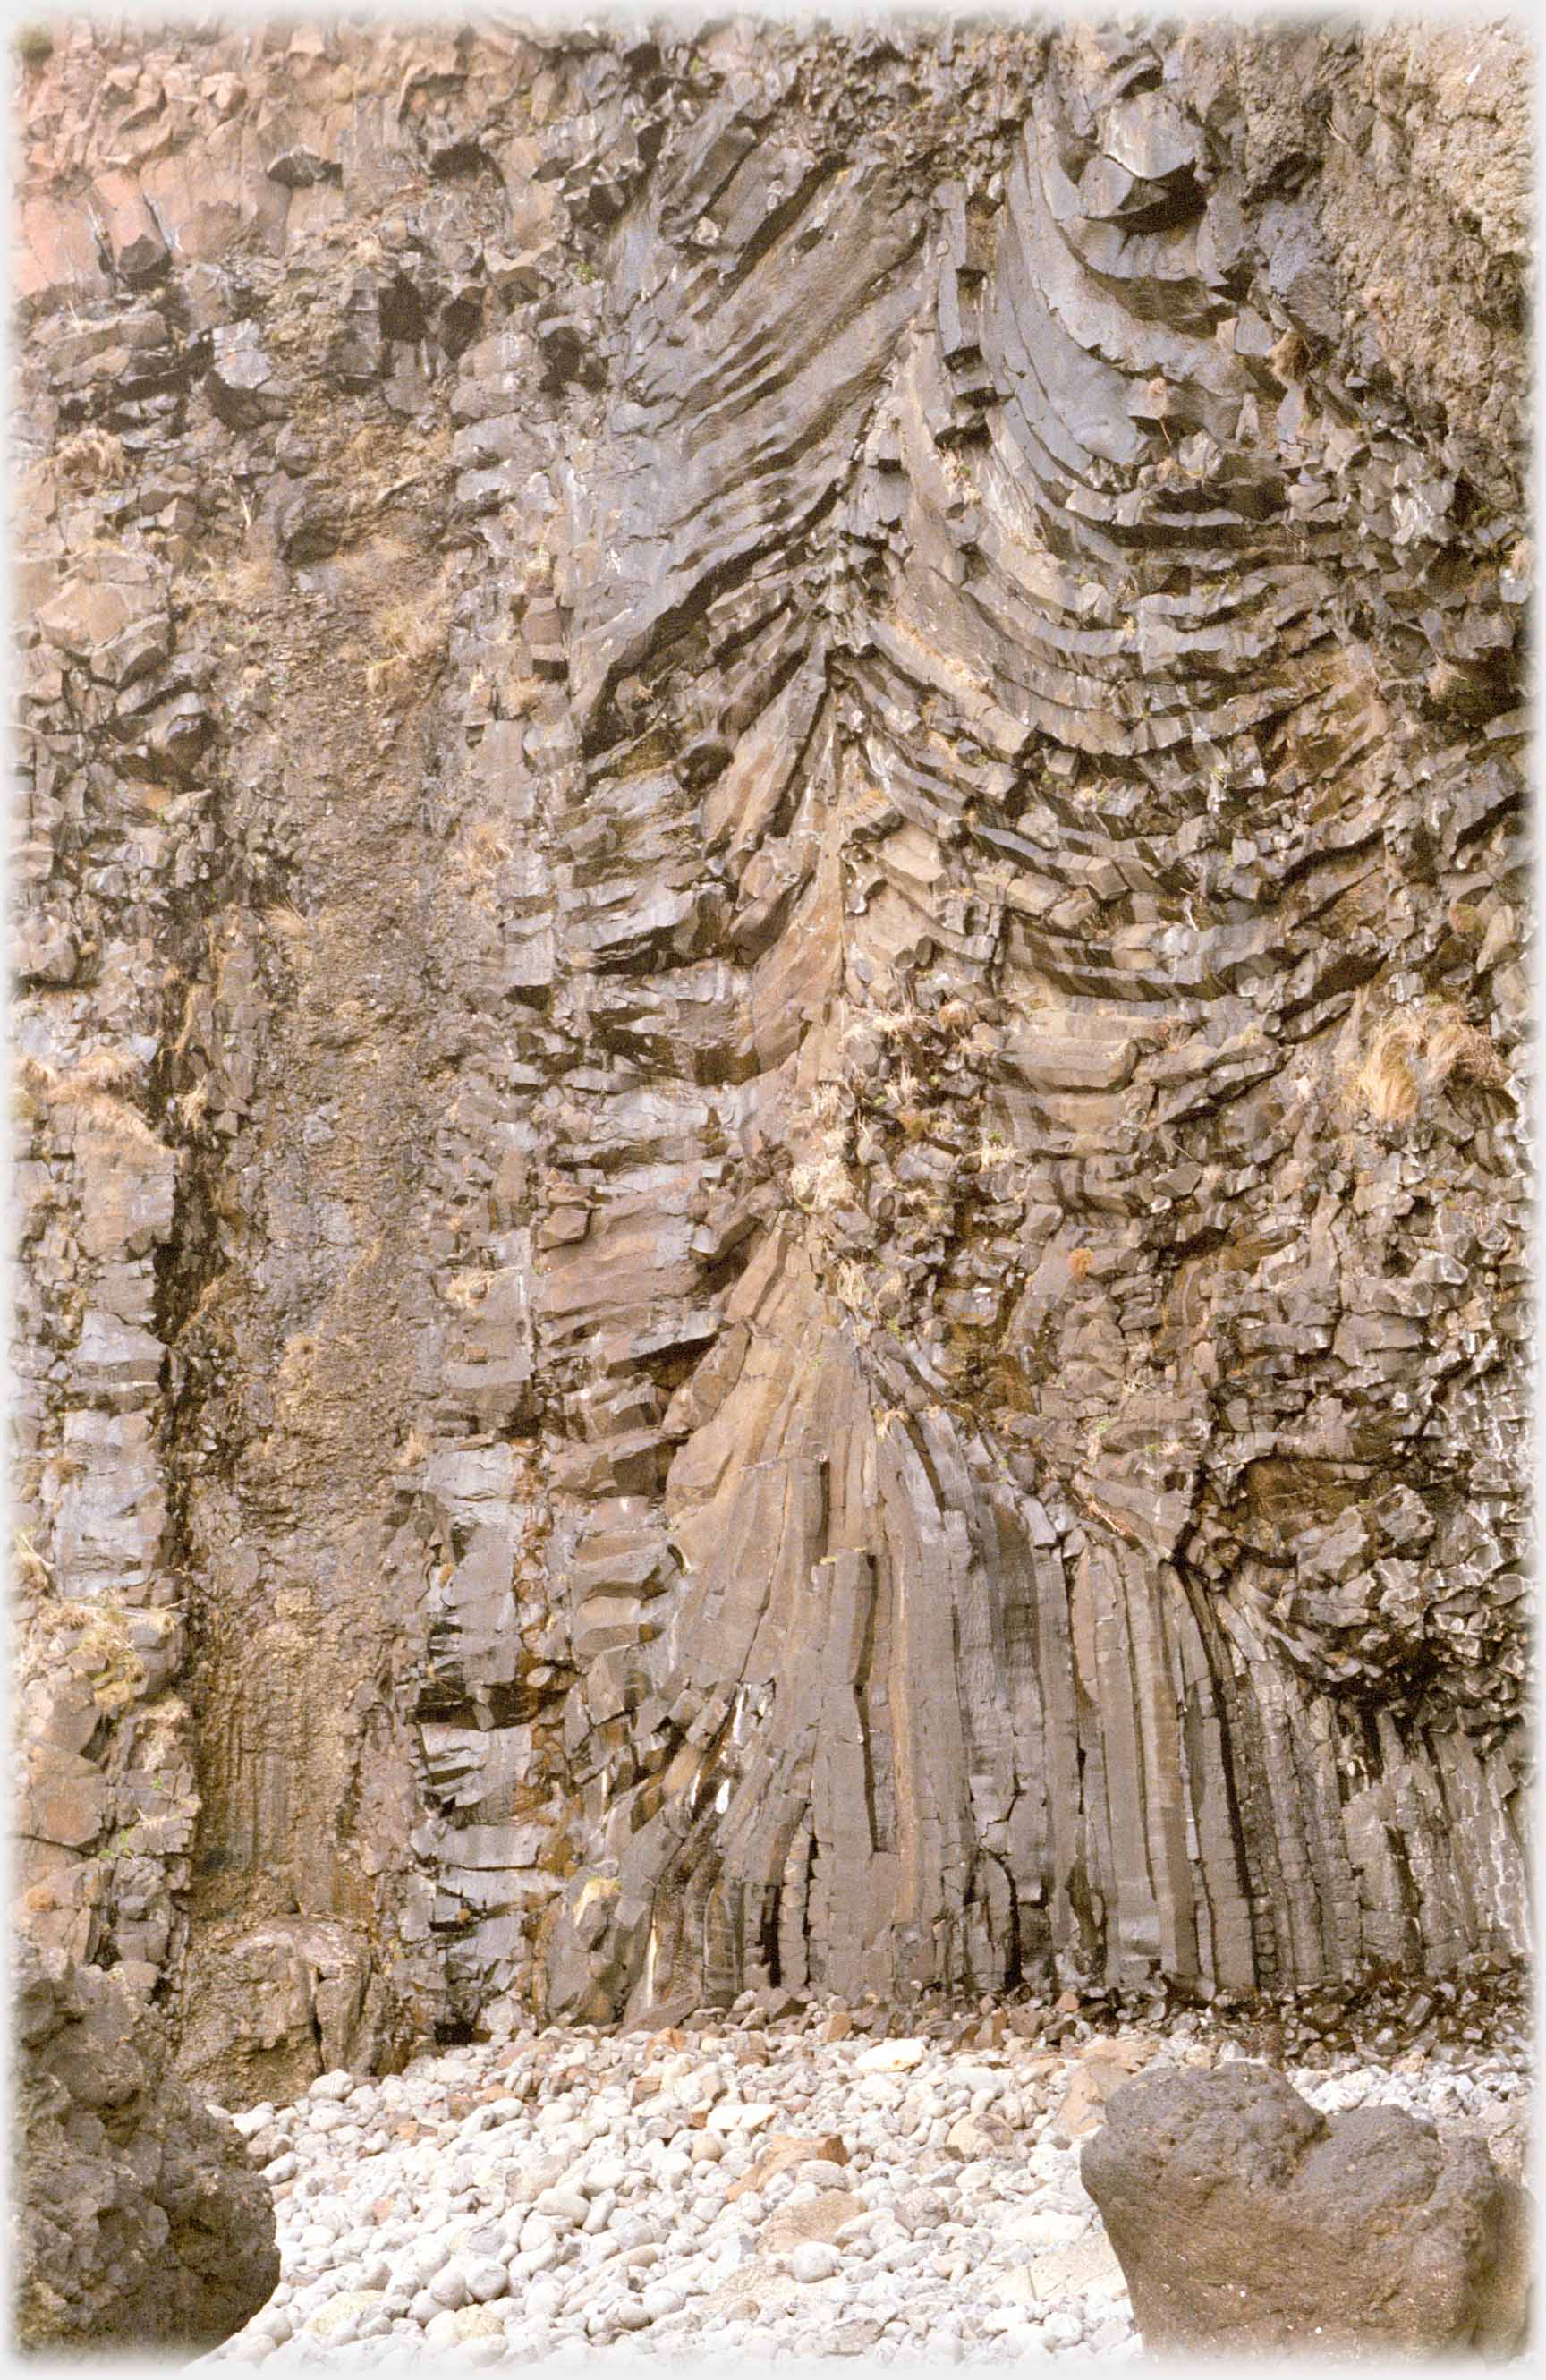 Rock tree formation in cliff face.